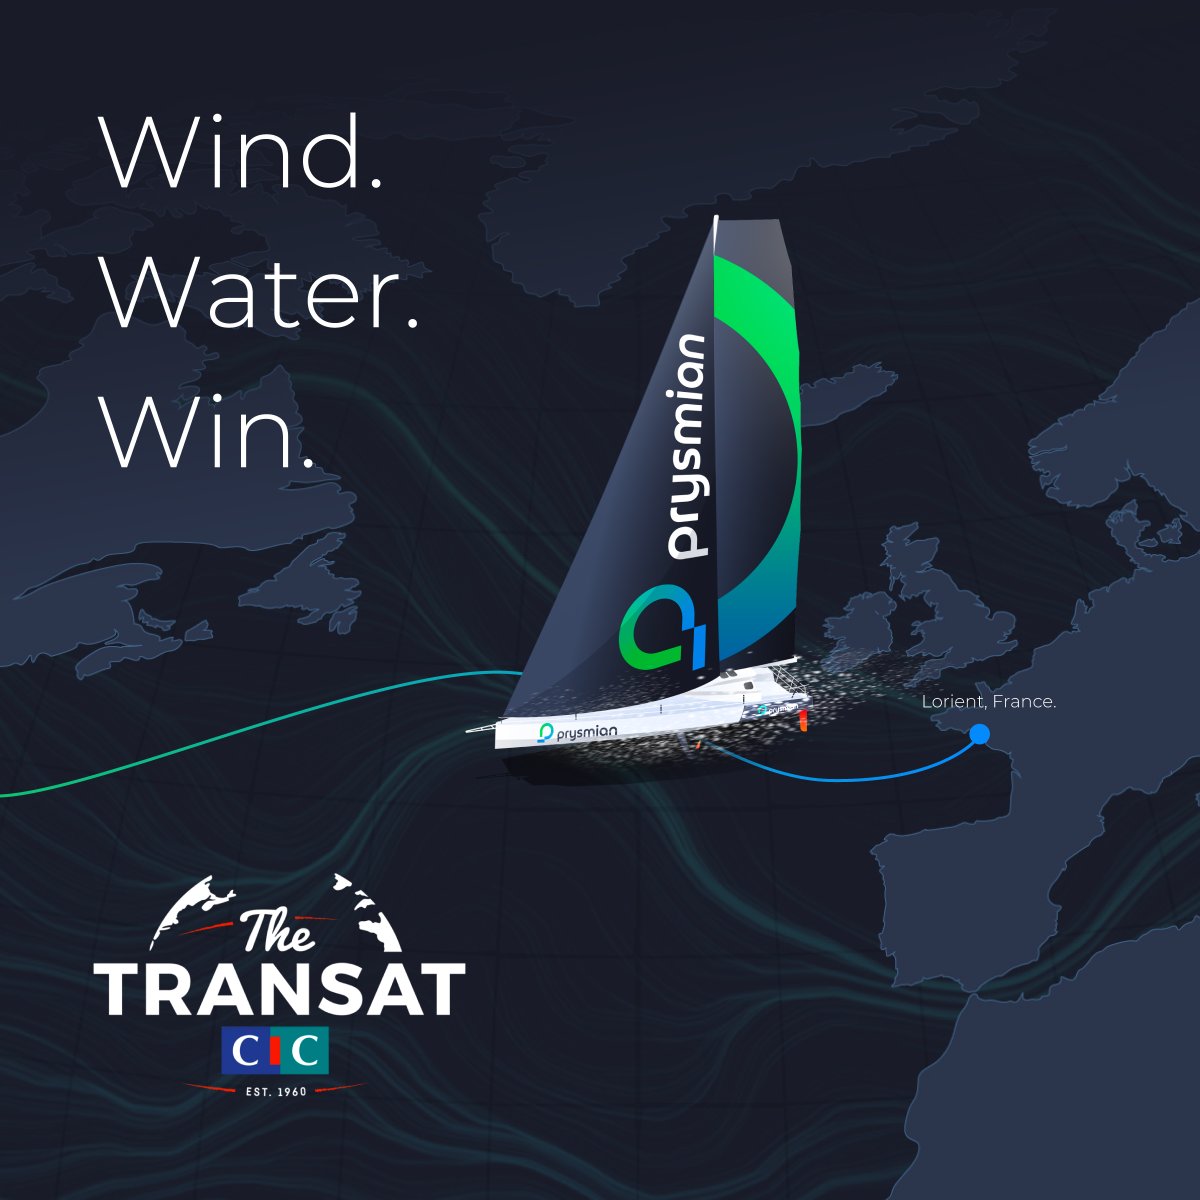 2024 @The_Transat_CIC has officially started! This morning, our open-ocean racer @GiancarloPedote departed from France on board Prysmian’s IMOCA-class yacht to race to New York. This is our ambition and our dream: a future powered by nature. Team Prysmian sends extra wind to…